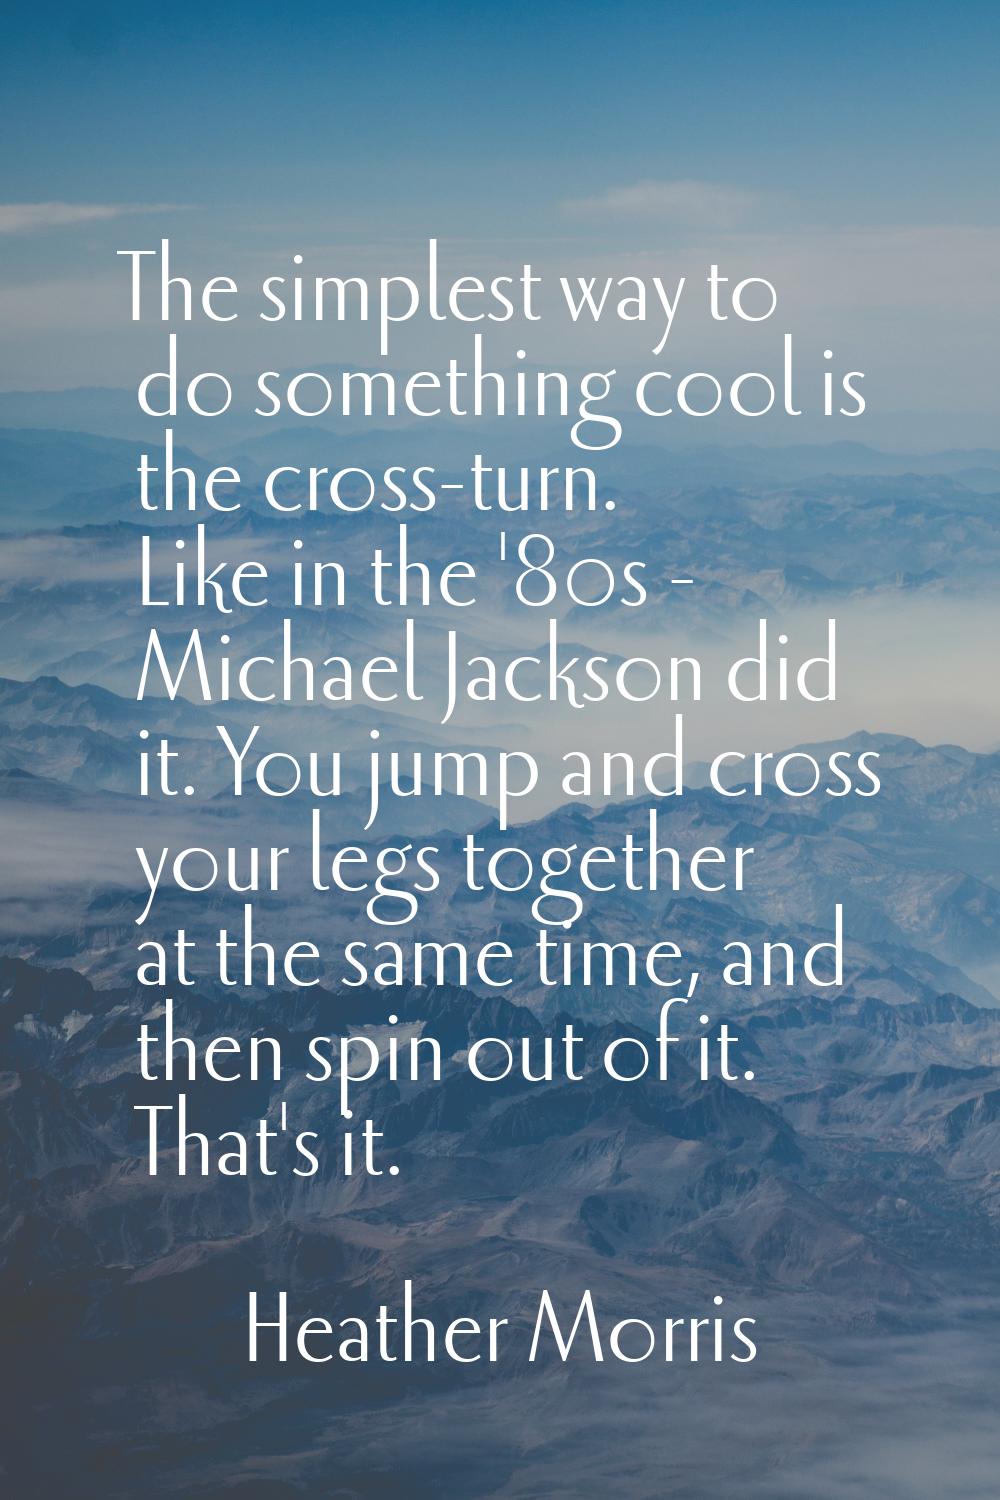 The simplest way to do something cool is the cross-turn. Like in the '80s - Michael Jackson did it.